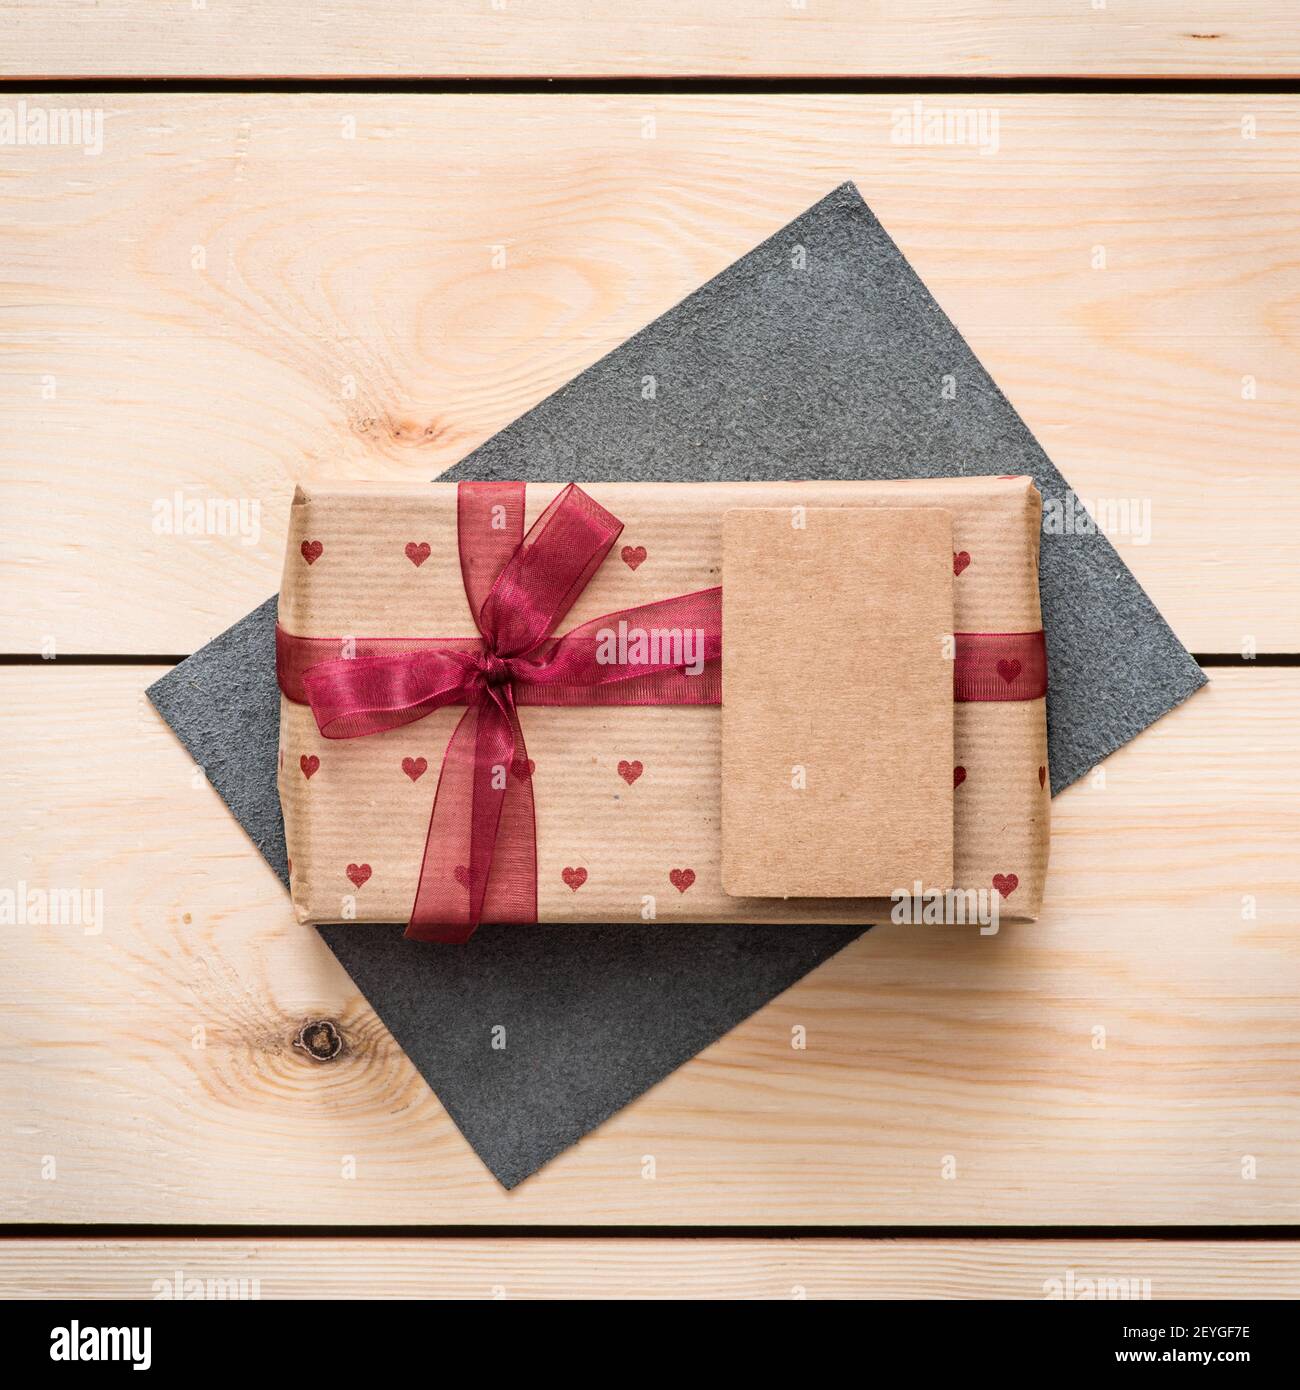 Gift box with white blank tag and hearts. Stock Photo